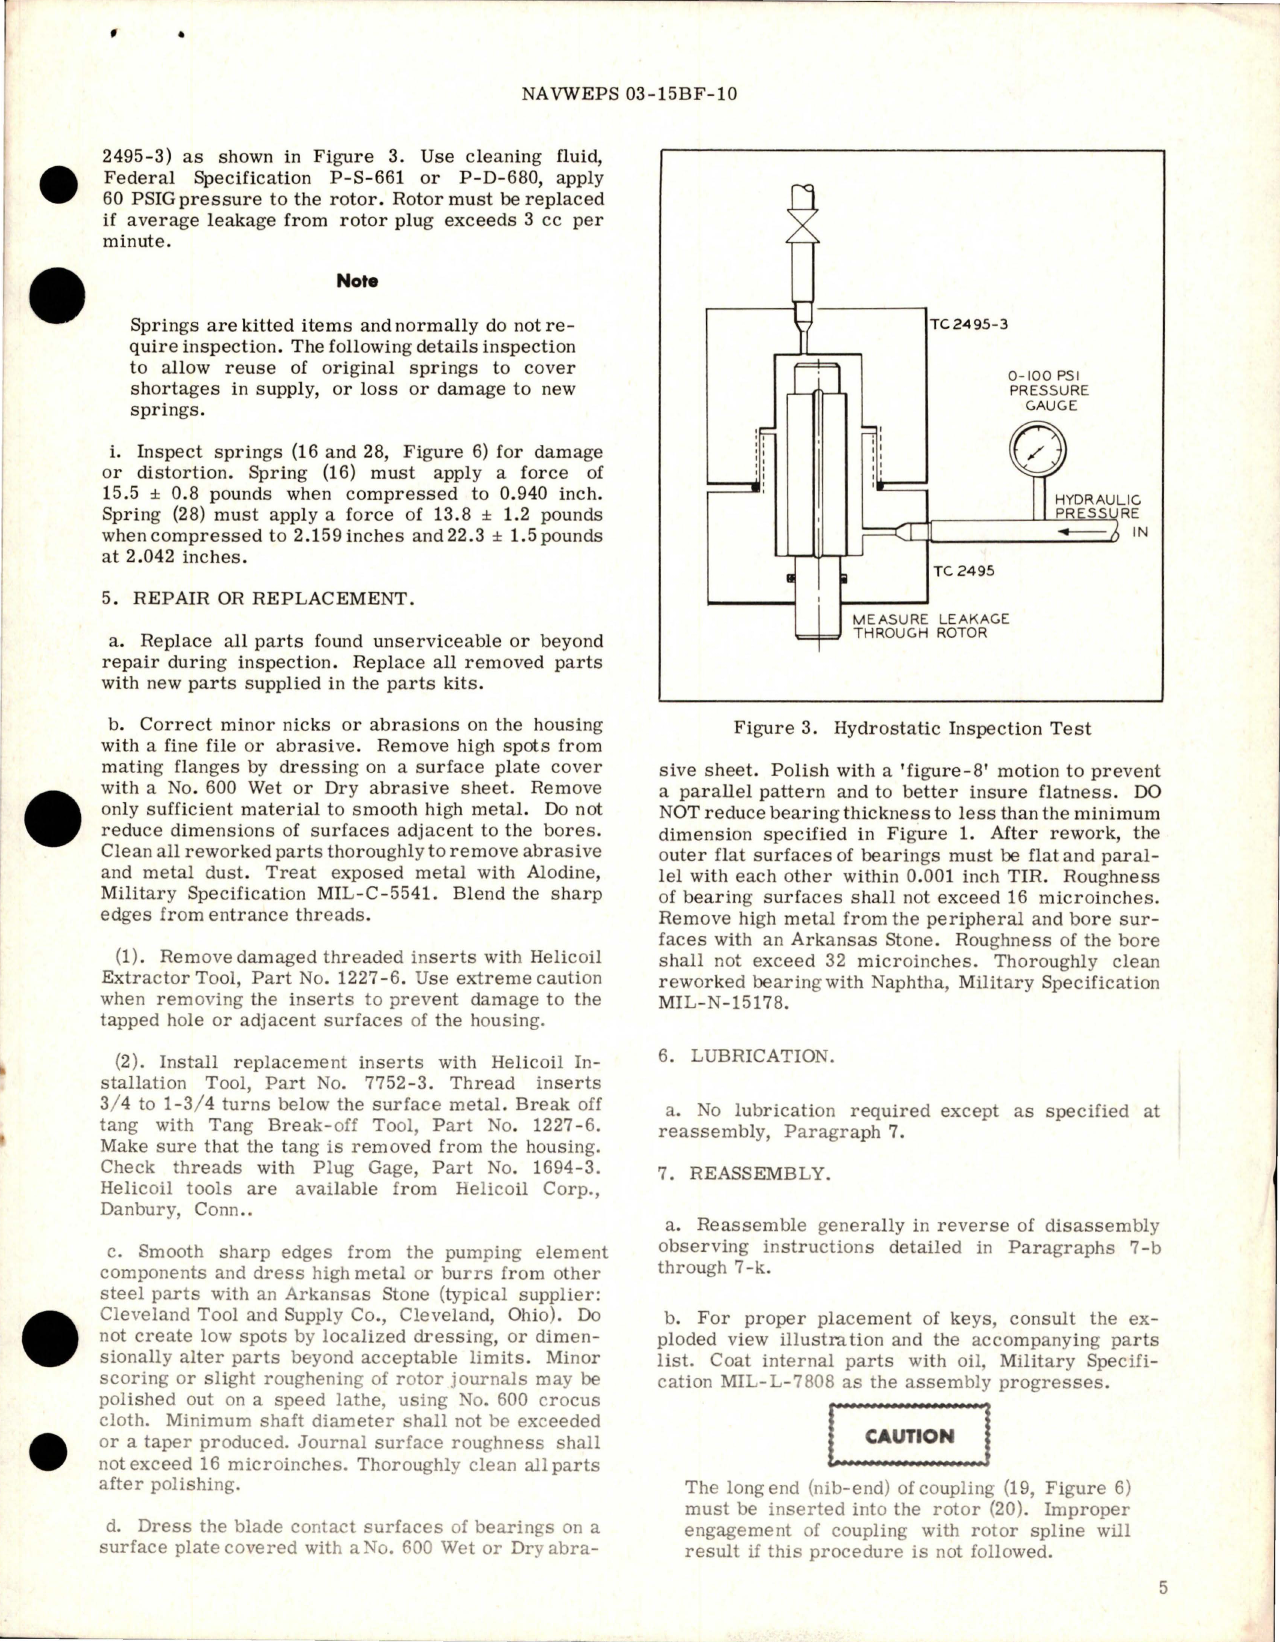 Sample page 7 from AirCorps Library document: Overhaul Instructions with Parts for Main Lube Pump - LSI Model RR16730A and RR16730D 